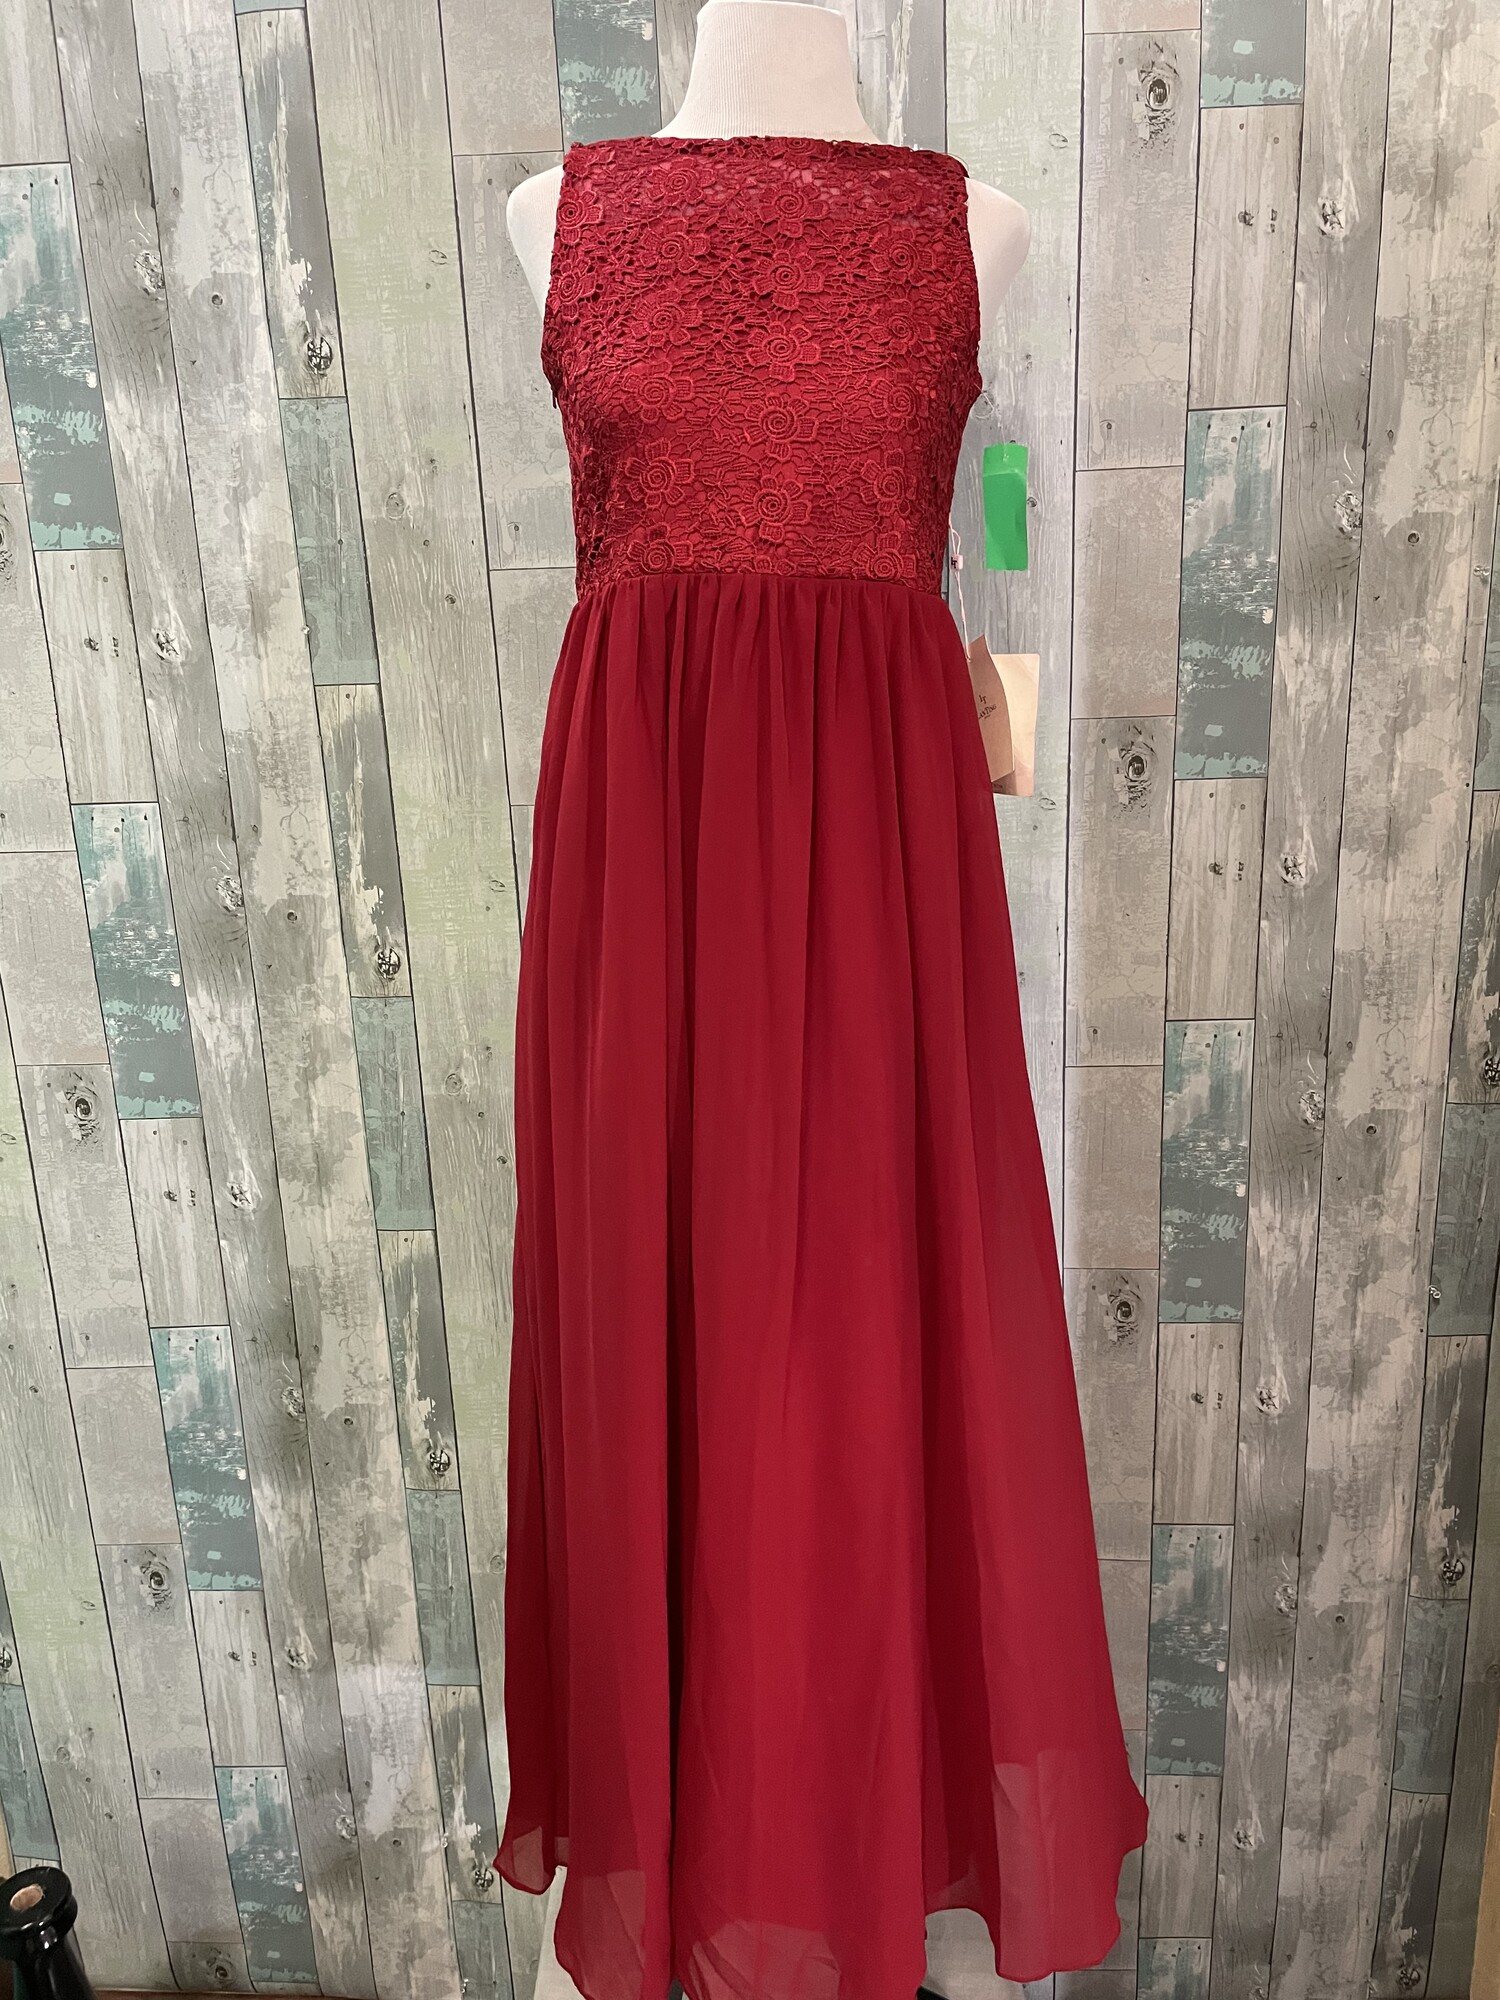 NEW LanTing Long Formal
Side zip closure, lace top, flowly lined skirt
Red
Size: Small